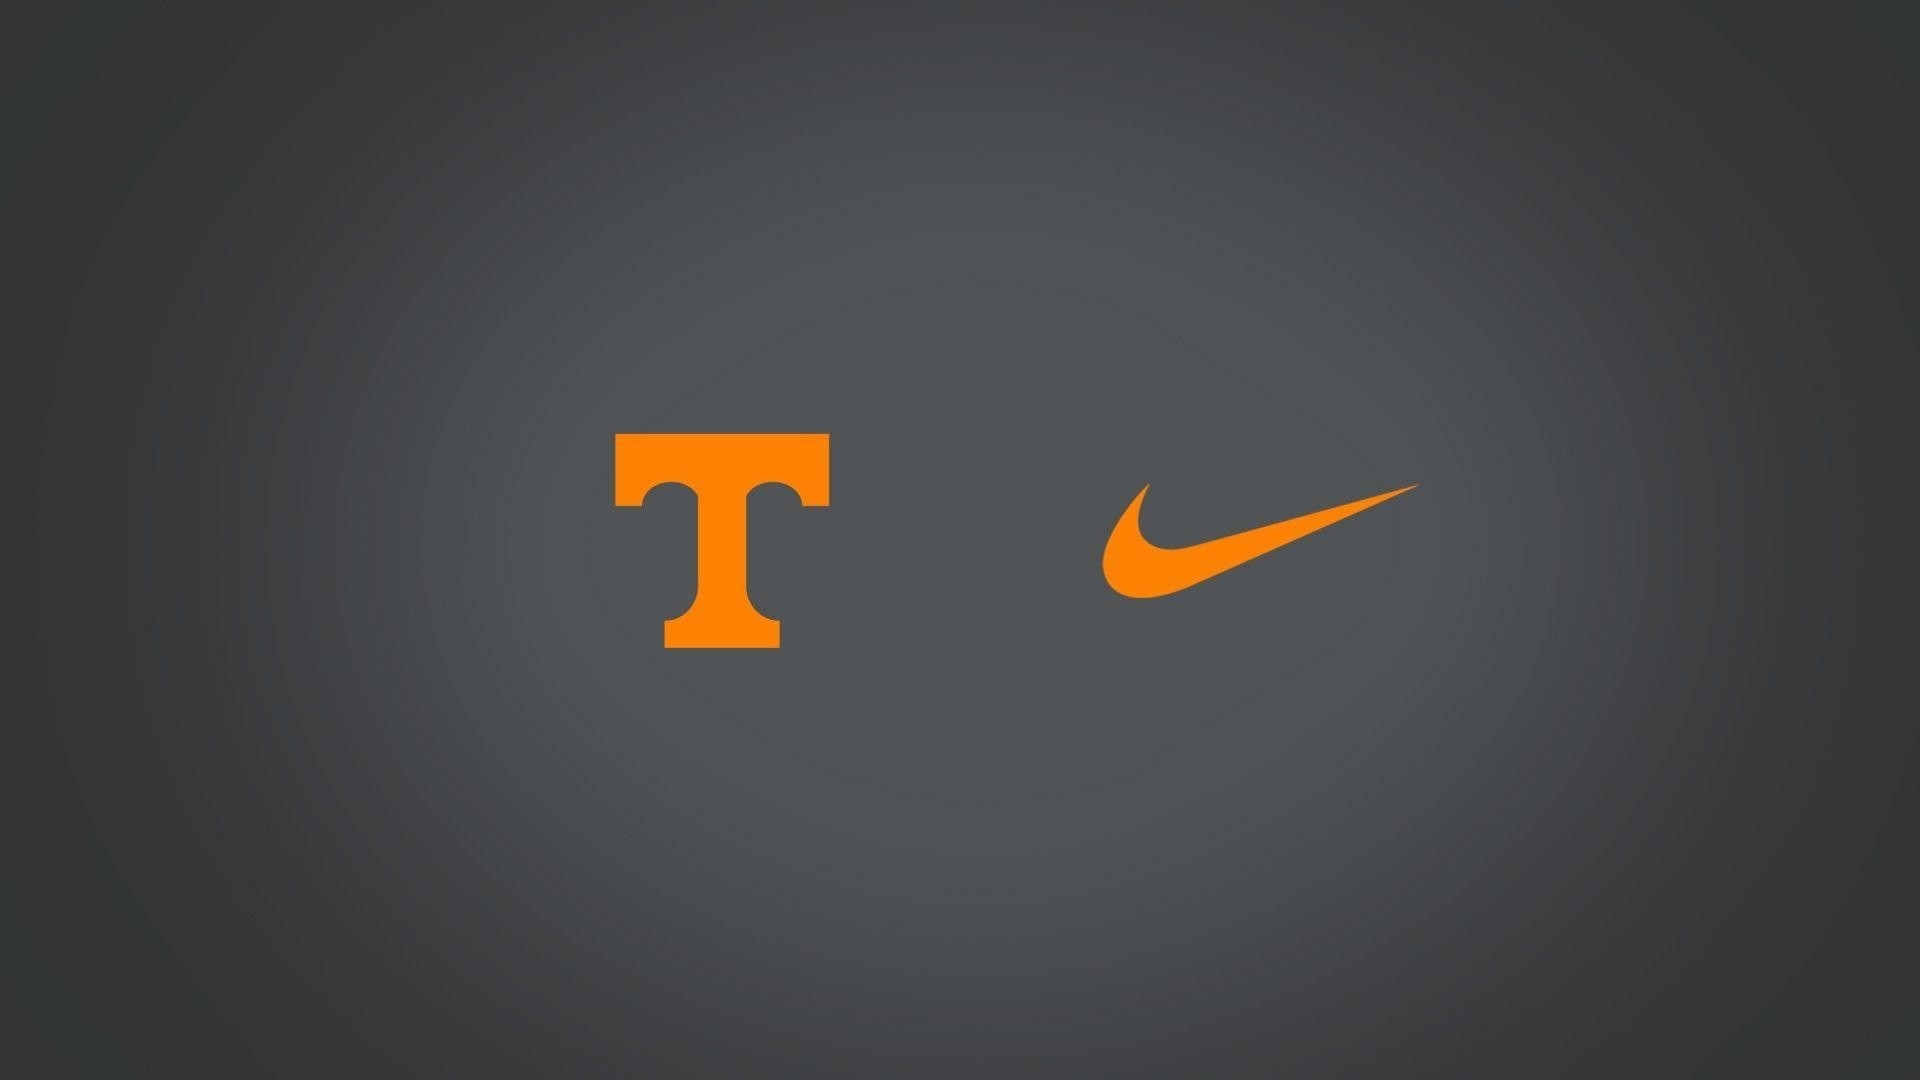 1920x1080 Title : tennessee vols wallpapers – wallpaper cave. Dimension : 1920 x  1080. File Type : JPG/JPEG